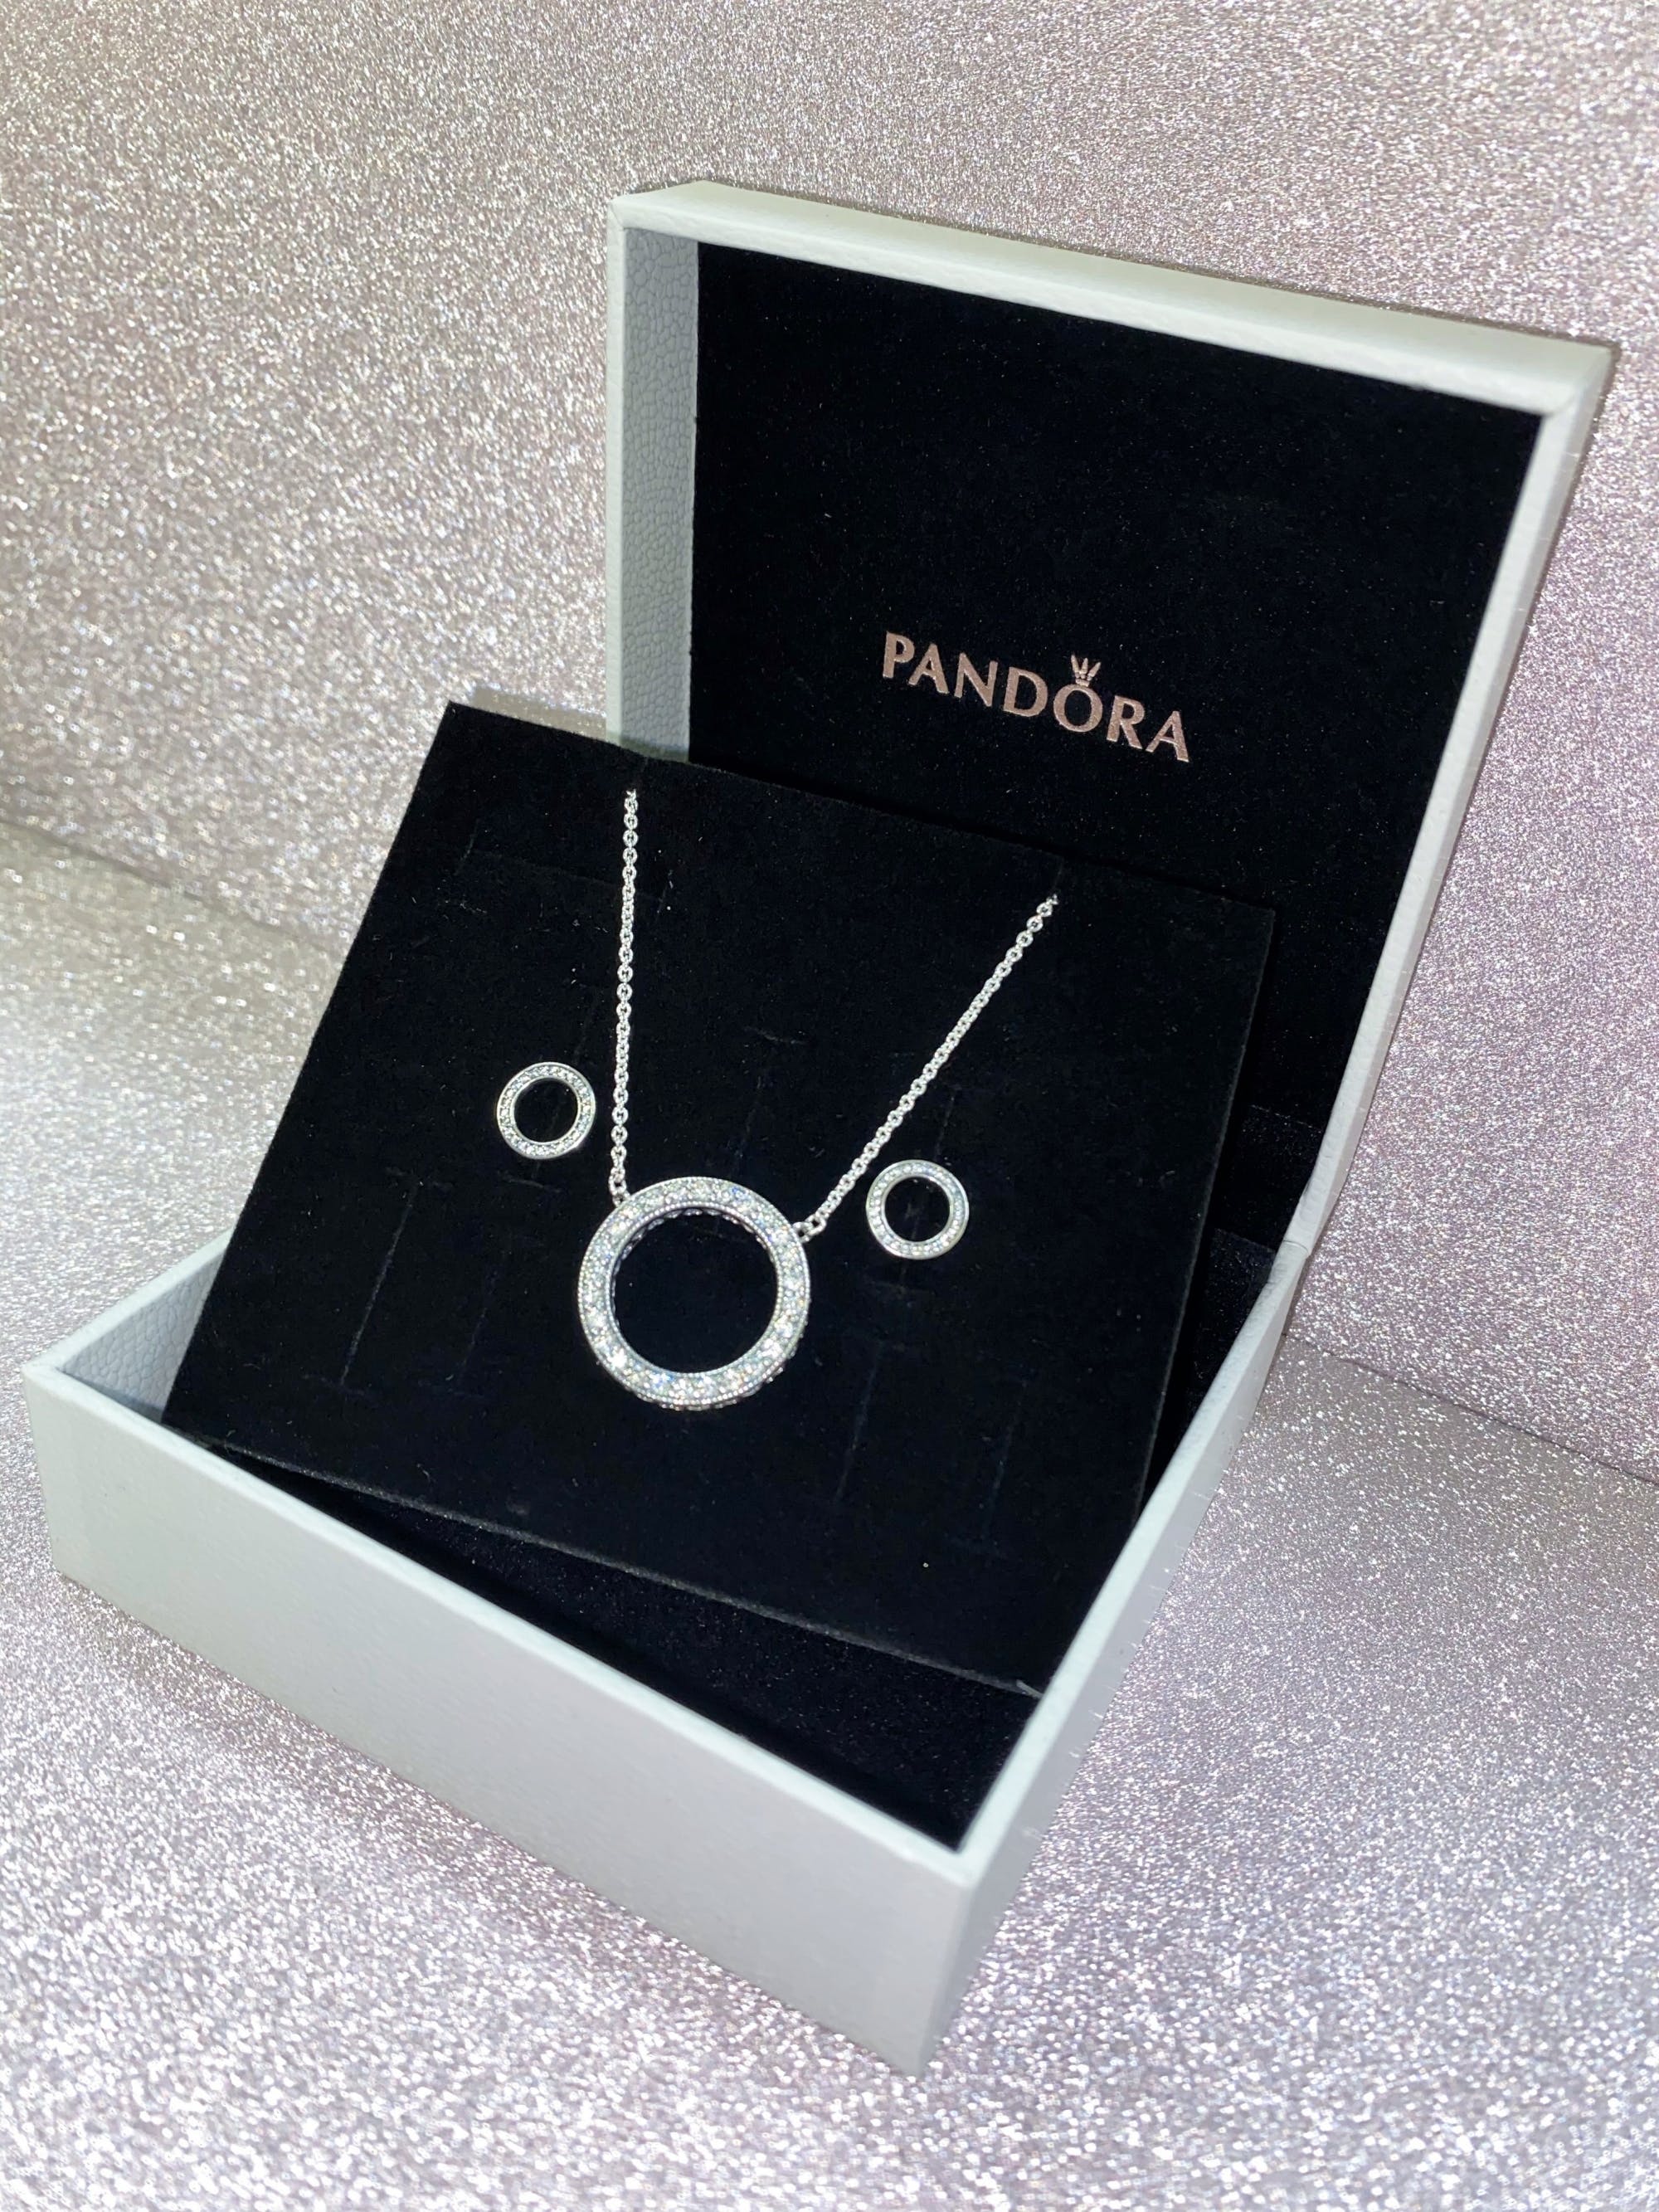 It's hard to go wrong with a gift from our Pandora, like this Forever Pandora necklace and earrings set  £135